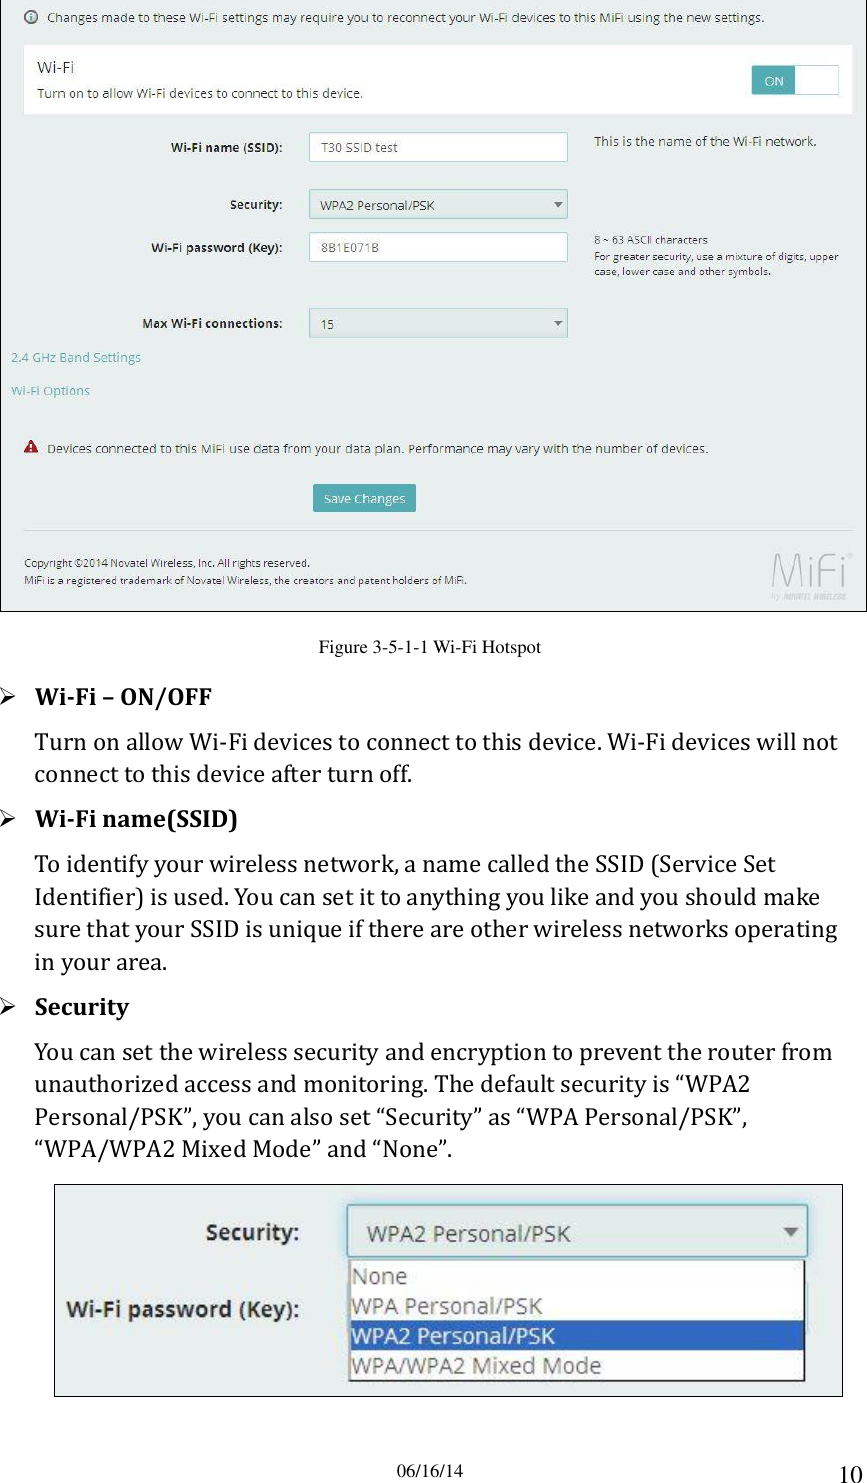 06/16/14 10  Figure 3-5-1-1 Wi-Fi Hotspot  Wi-Fi – ON/OFF Turn on allow Wi-Fi devices to connect to this device. Wi-Fi devices will not connect to this device after turn off.  Wi-Fi name(SSID) To identify your wireless network, a name called the SSID (Service Set Identifier) is used. You can set it to anything you like and you should make sure that your SSID is unique if there are other wireless networks operating in your area.  Security You can set the wireless security and encryption to prevent the router from unauthorized access and monitoring. The default security is “WPA2 Personal/PSK”, you can also set “Security” as “WPA Personal/PSK”, “WPA/WPA2 Mixed Mode” and “None”.  